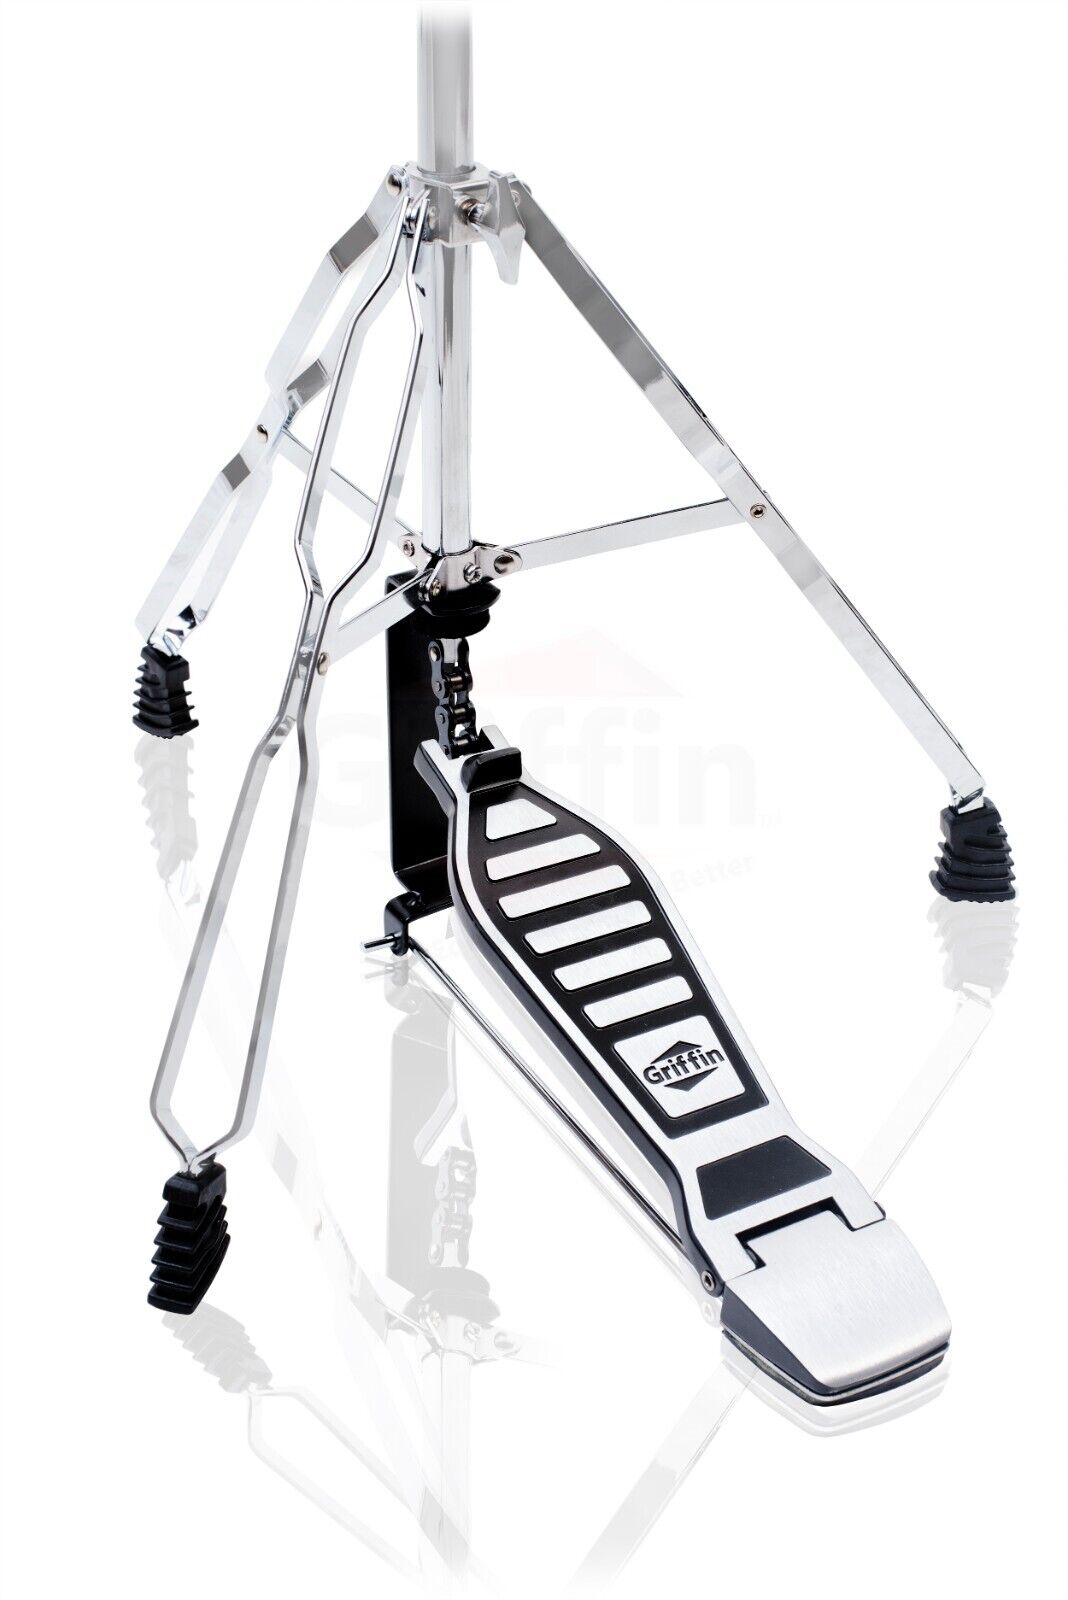 GRIFFIN Hi-Hat Stand | HiHat Cymbal Hardware Drum Pedal Holder Percussion Mount Griffin SM-LG-H80 - фотография #2